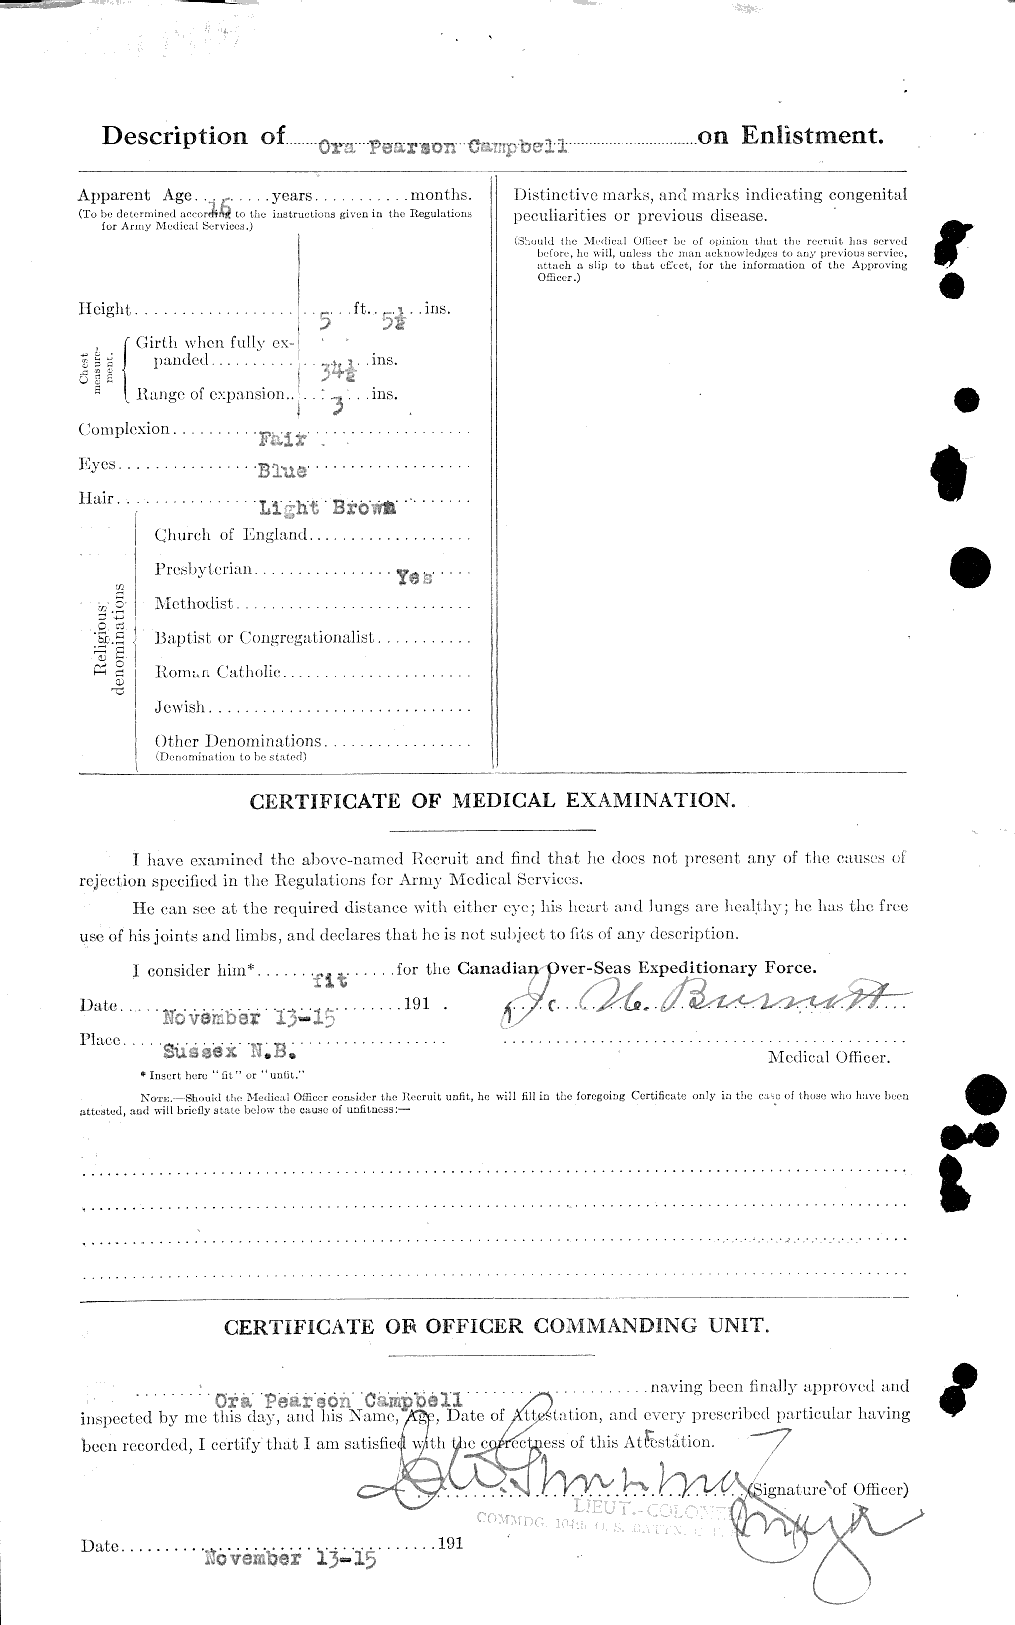 Personnel Records of the First World War - CEF 006983b